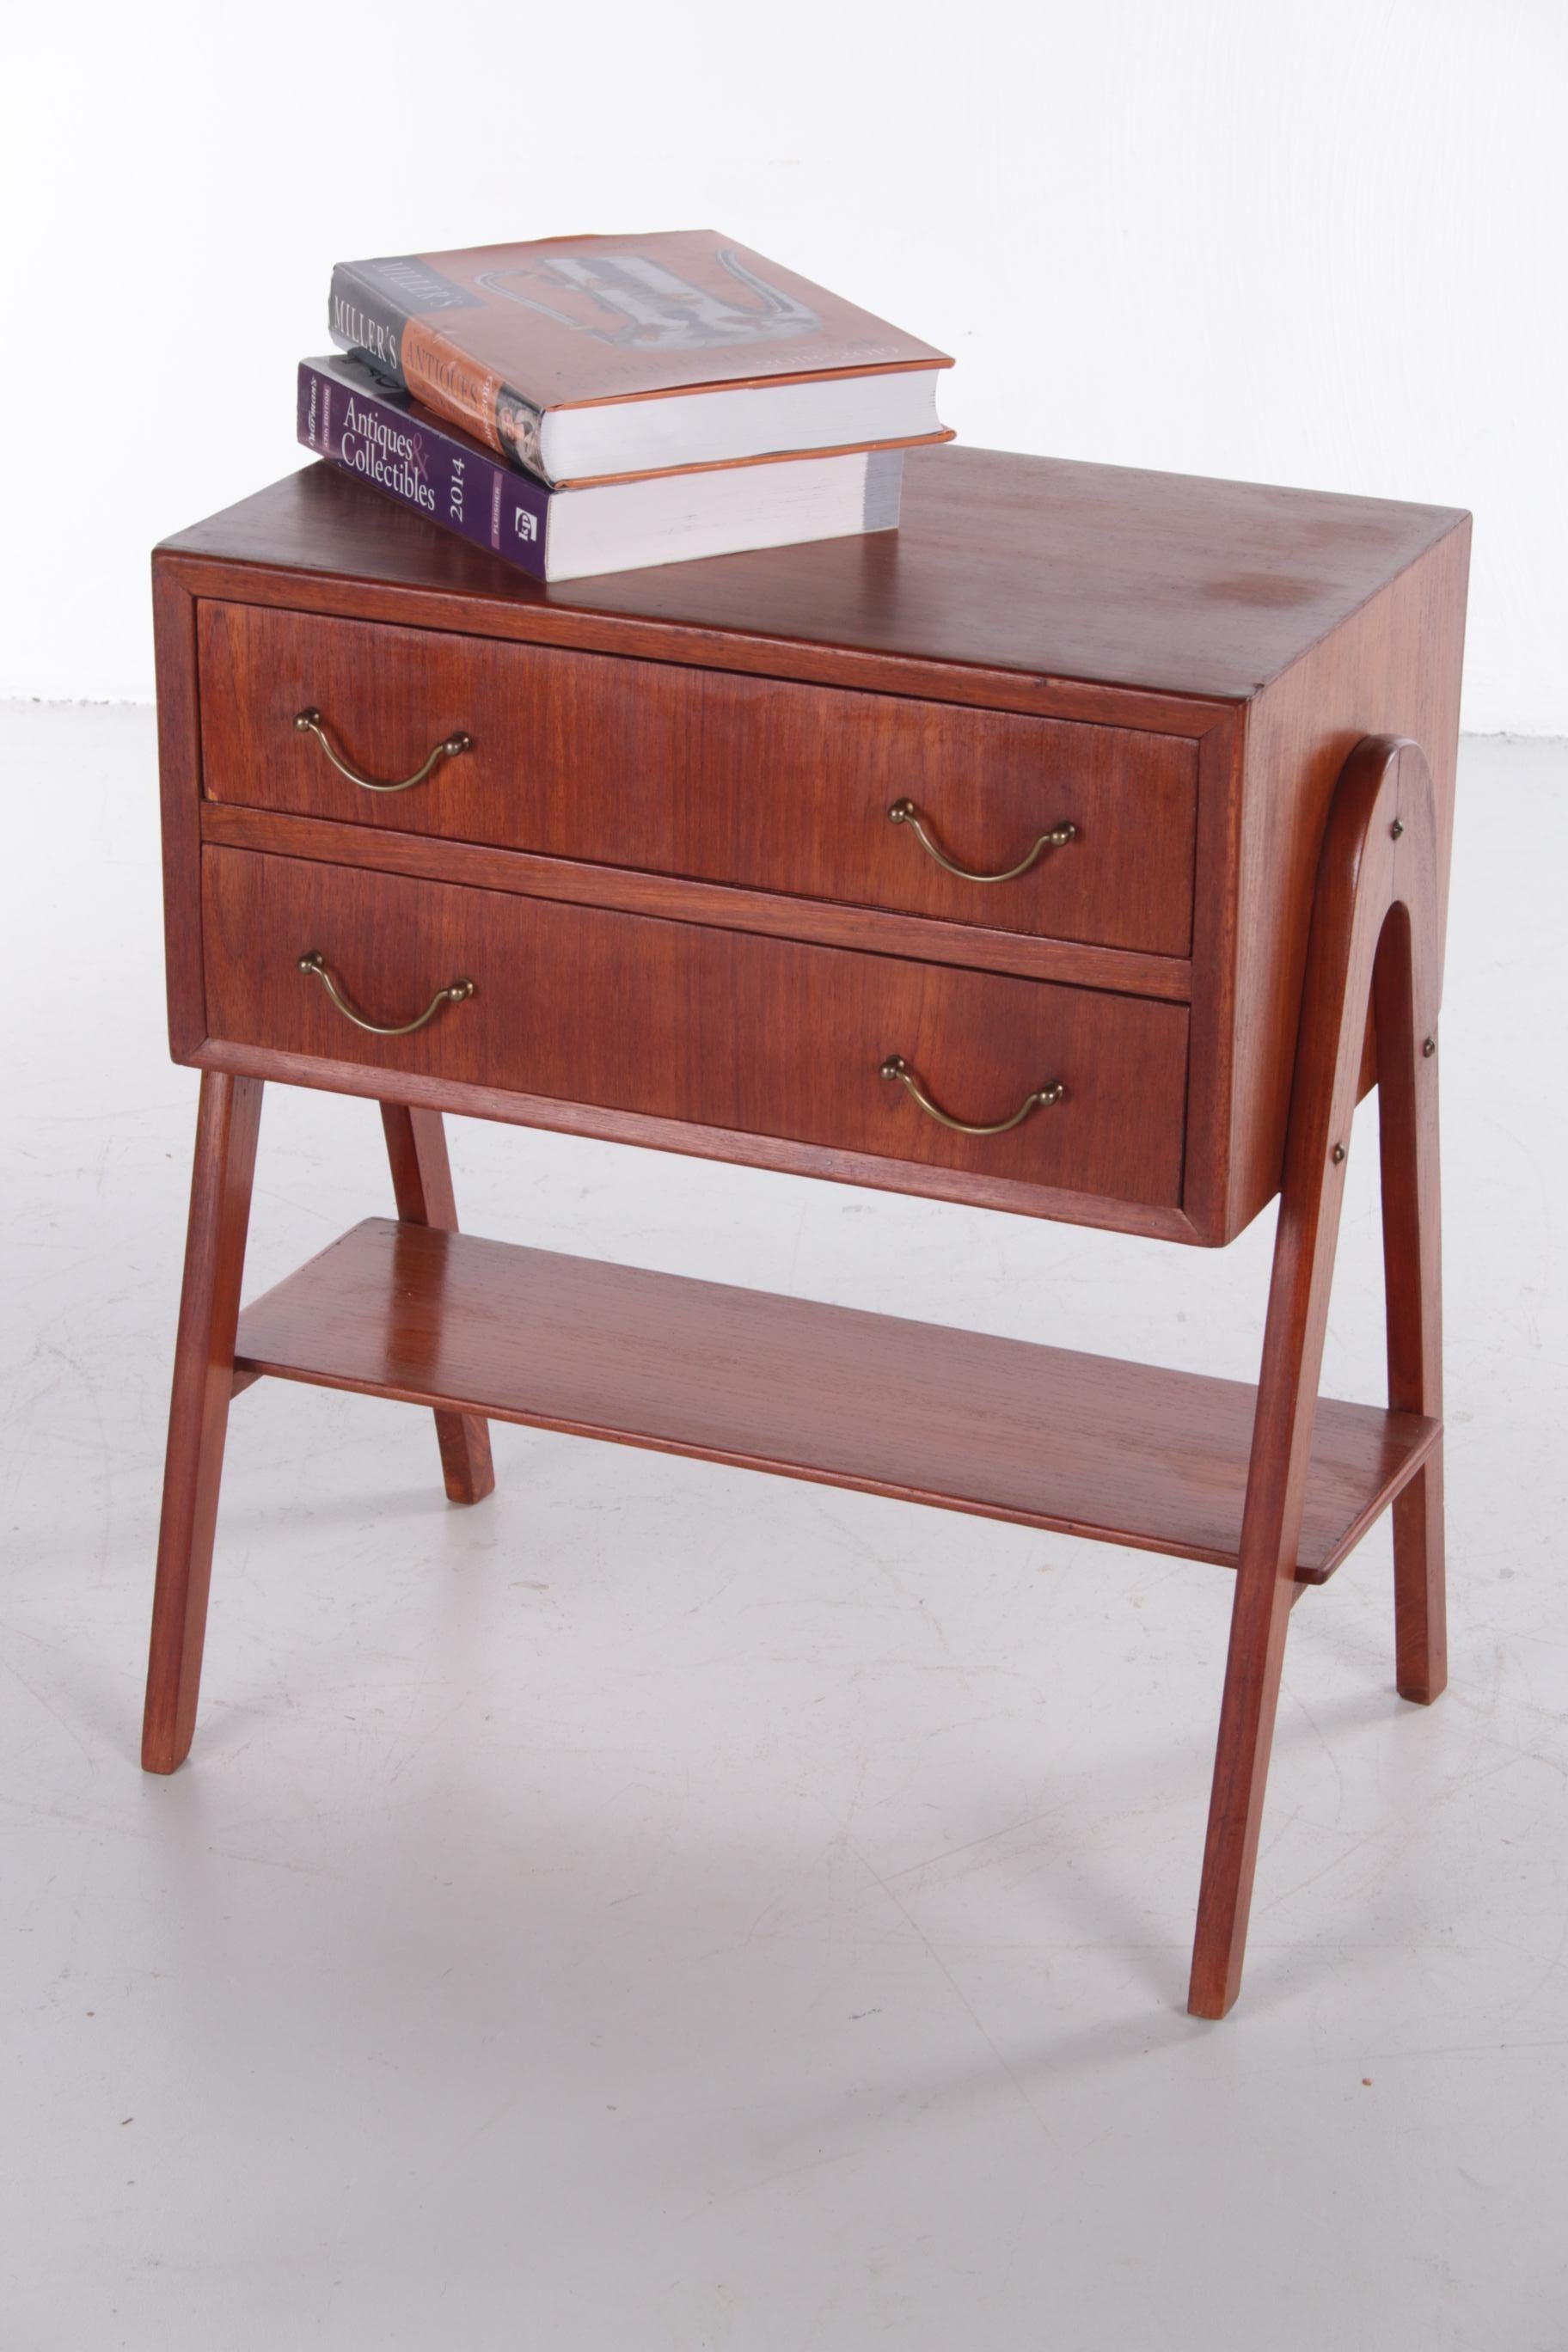 1960s Design 2 chest of drawers with beautiful handles

This elegant chest of drawers can be described as beautiful in one word. Country of origin: Denmark. Period: 1950s. Material: teak wood. Especially the special design, the elegant optical